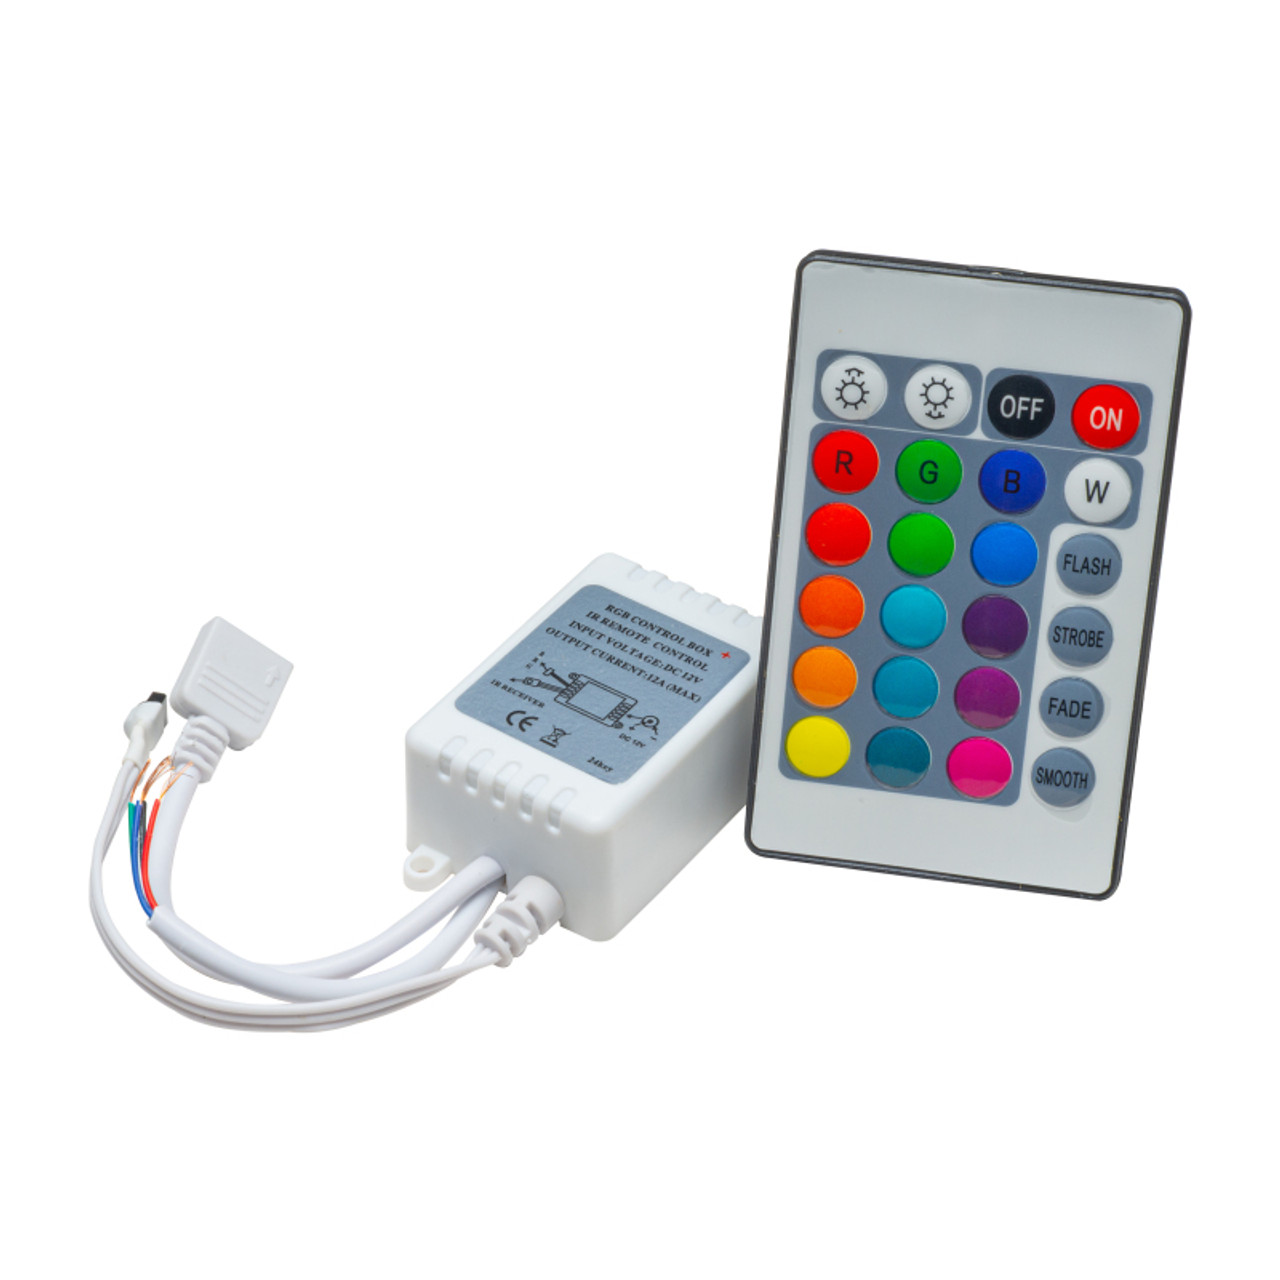 ORACLE Lighting ColorSHIFT 2.0 Infrared Remote Controller